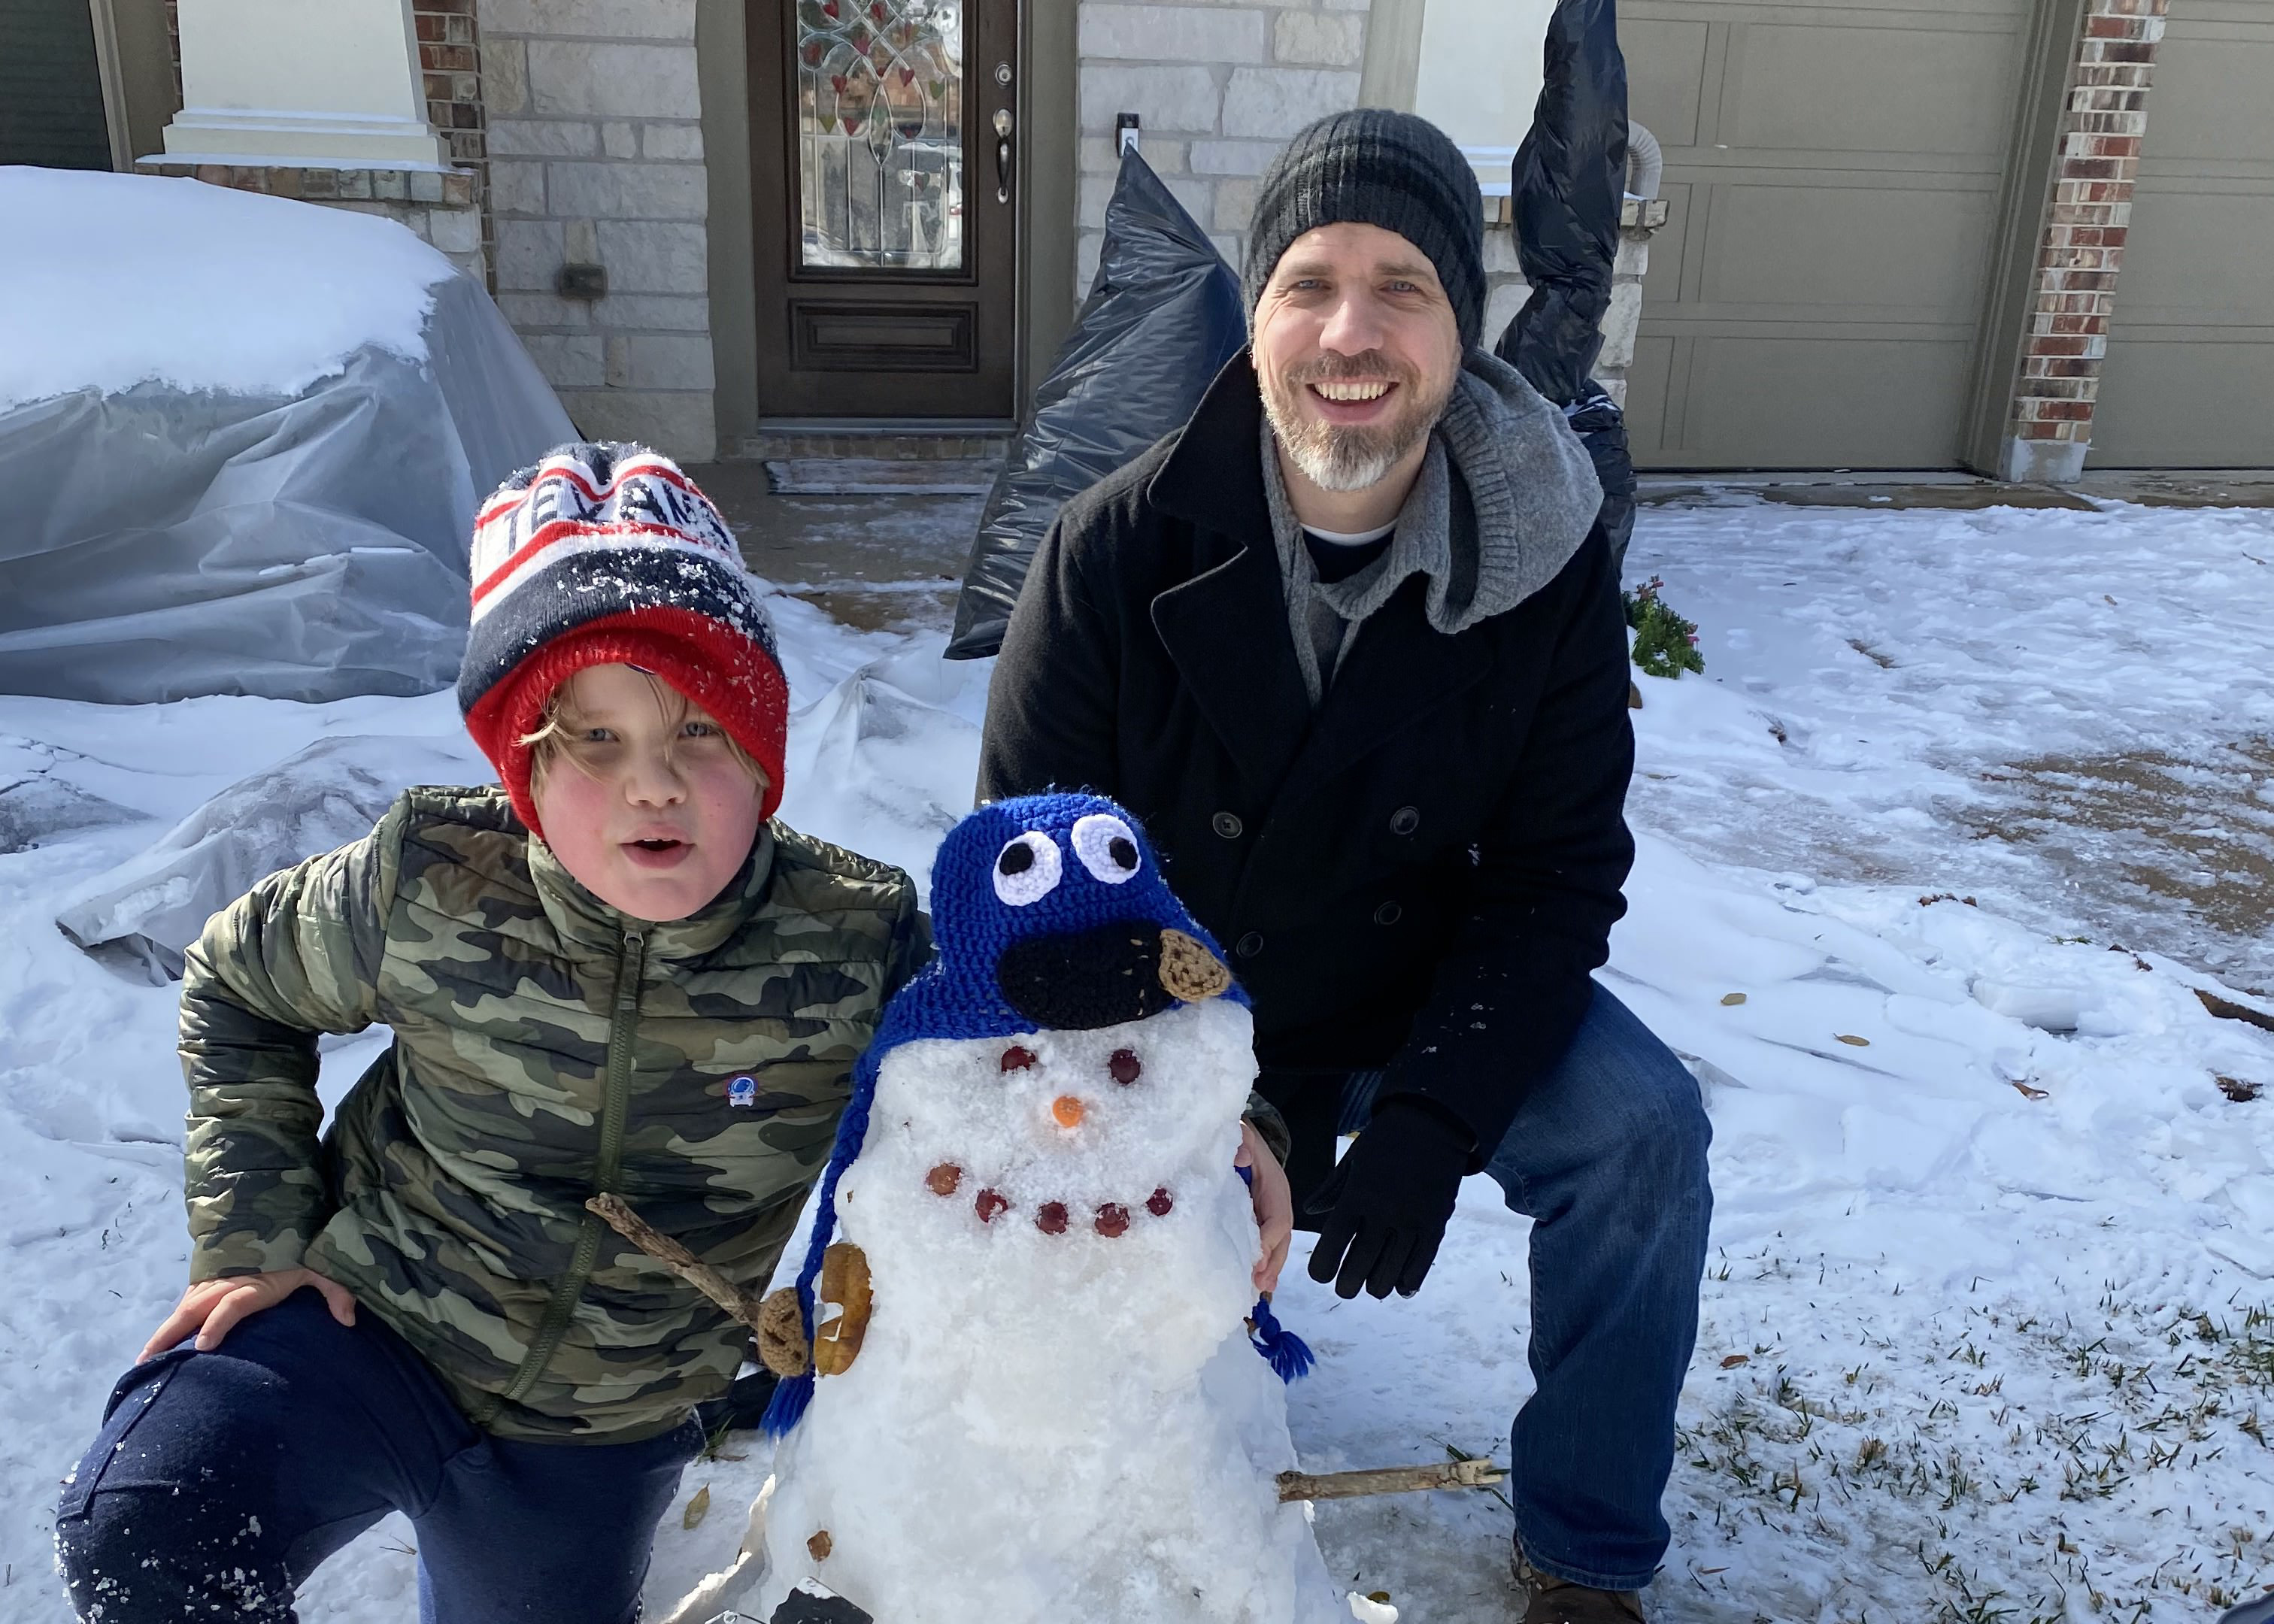 Jonathan making a snowman with his son